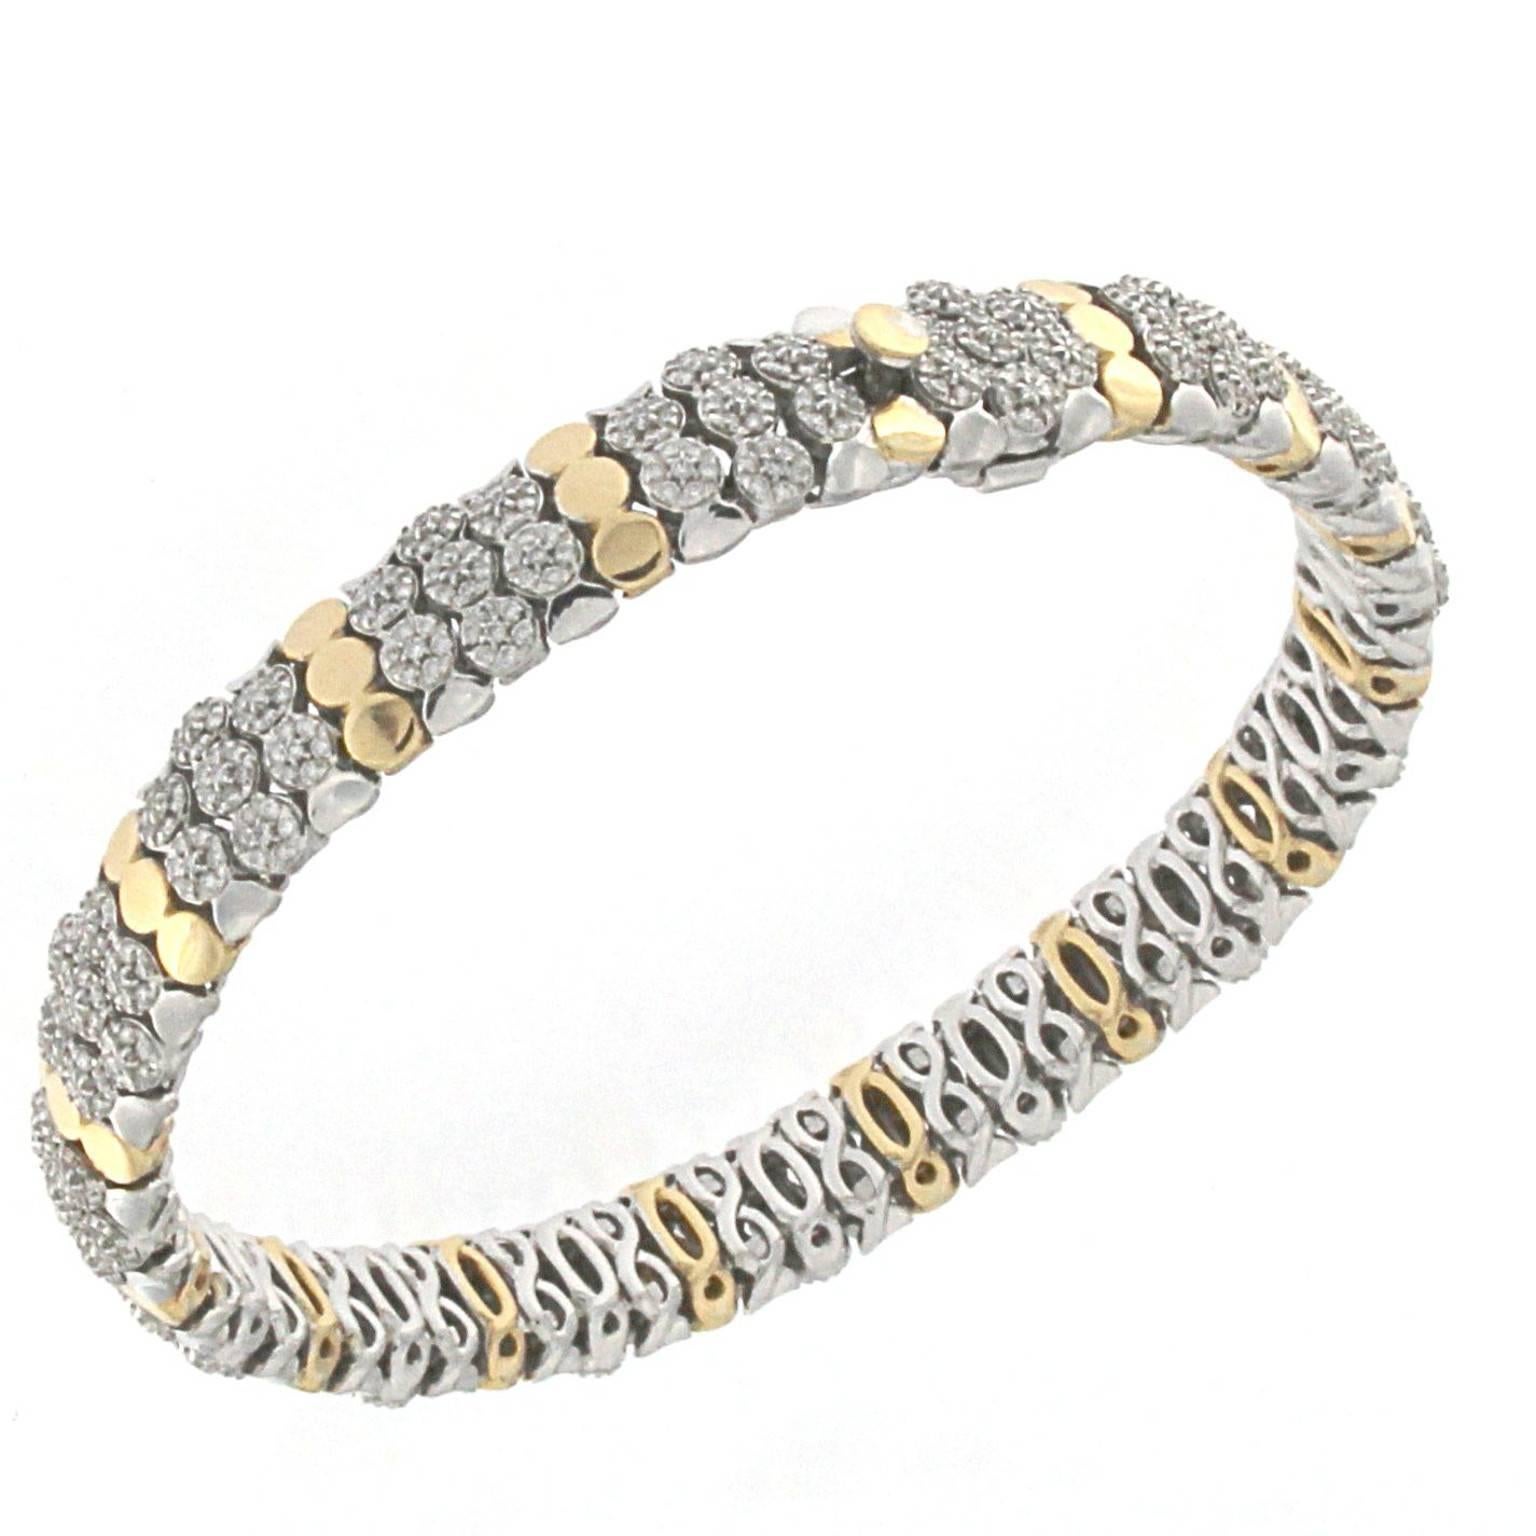 Titti collection bracelet in 18 kt rose gold and white diamonds 

The total lengh is 18.00 cm
the total weight of the gold is 29.30
the total weight of the diamonds is ct 2.25 (color HG clarity VVS1)
STAMP: 10 MI ITALY 750

